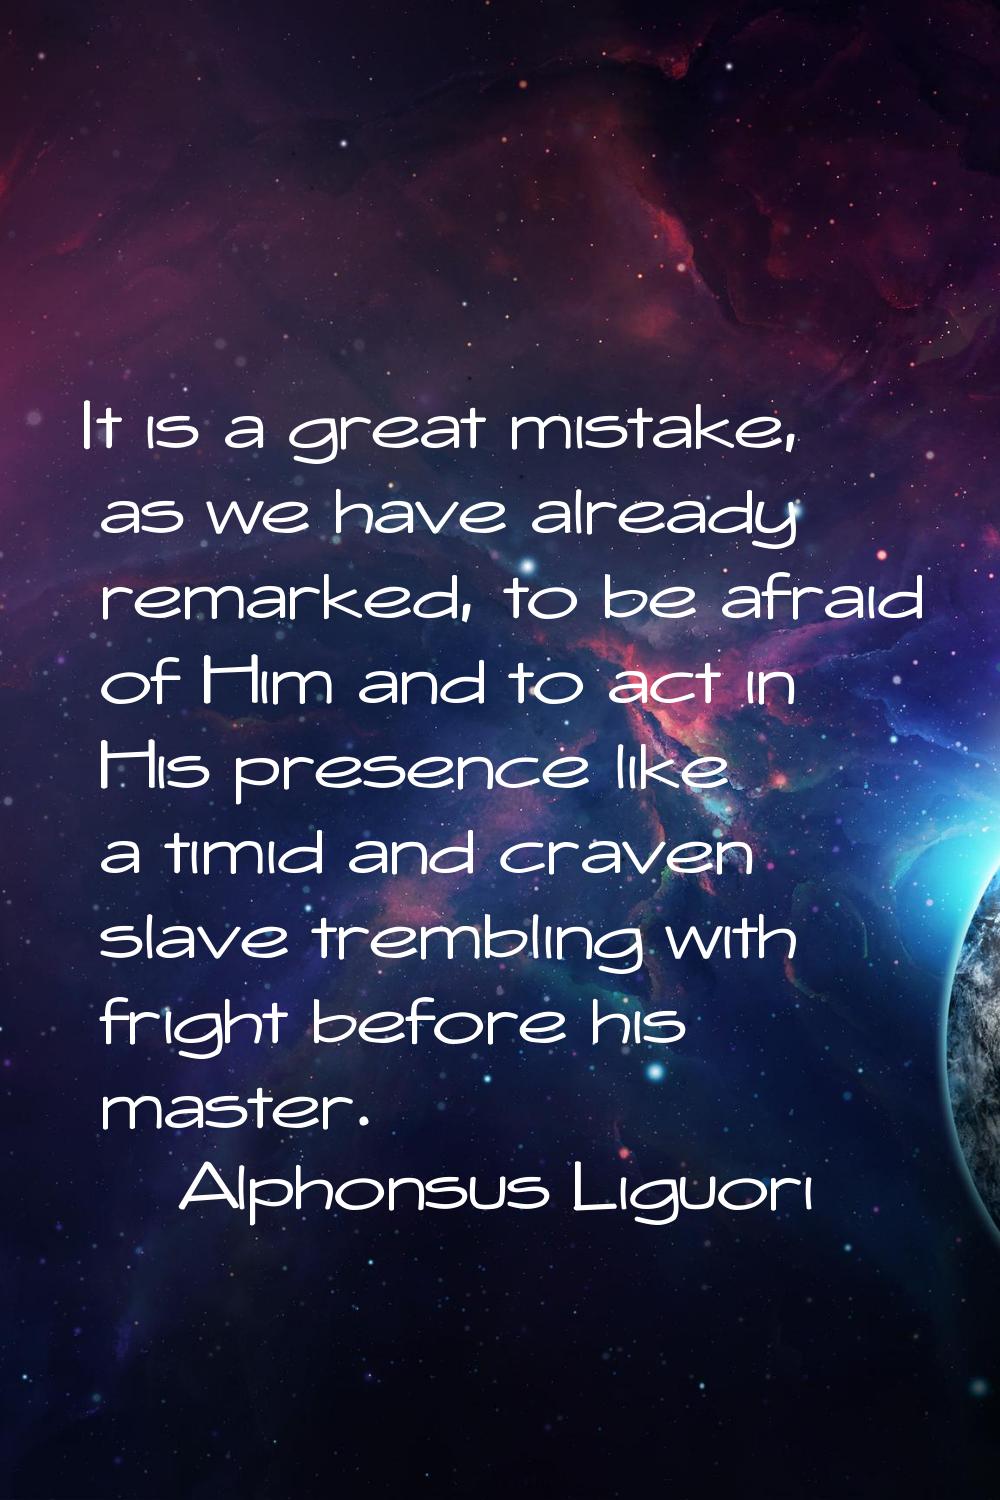 It is a great mistake, as we have already remarked, to be afraid of Him and to act in His presence 